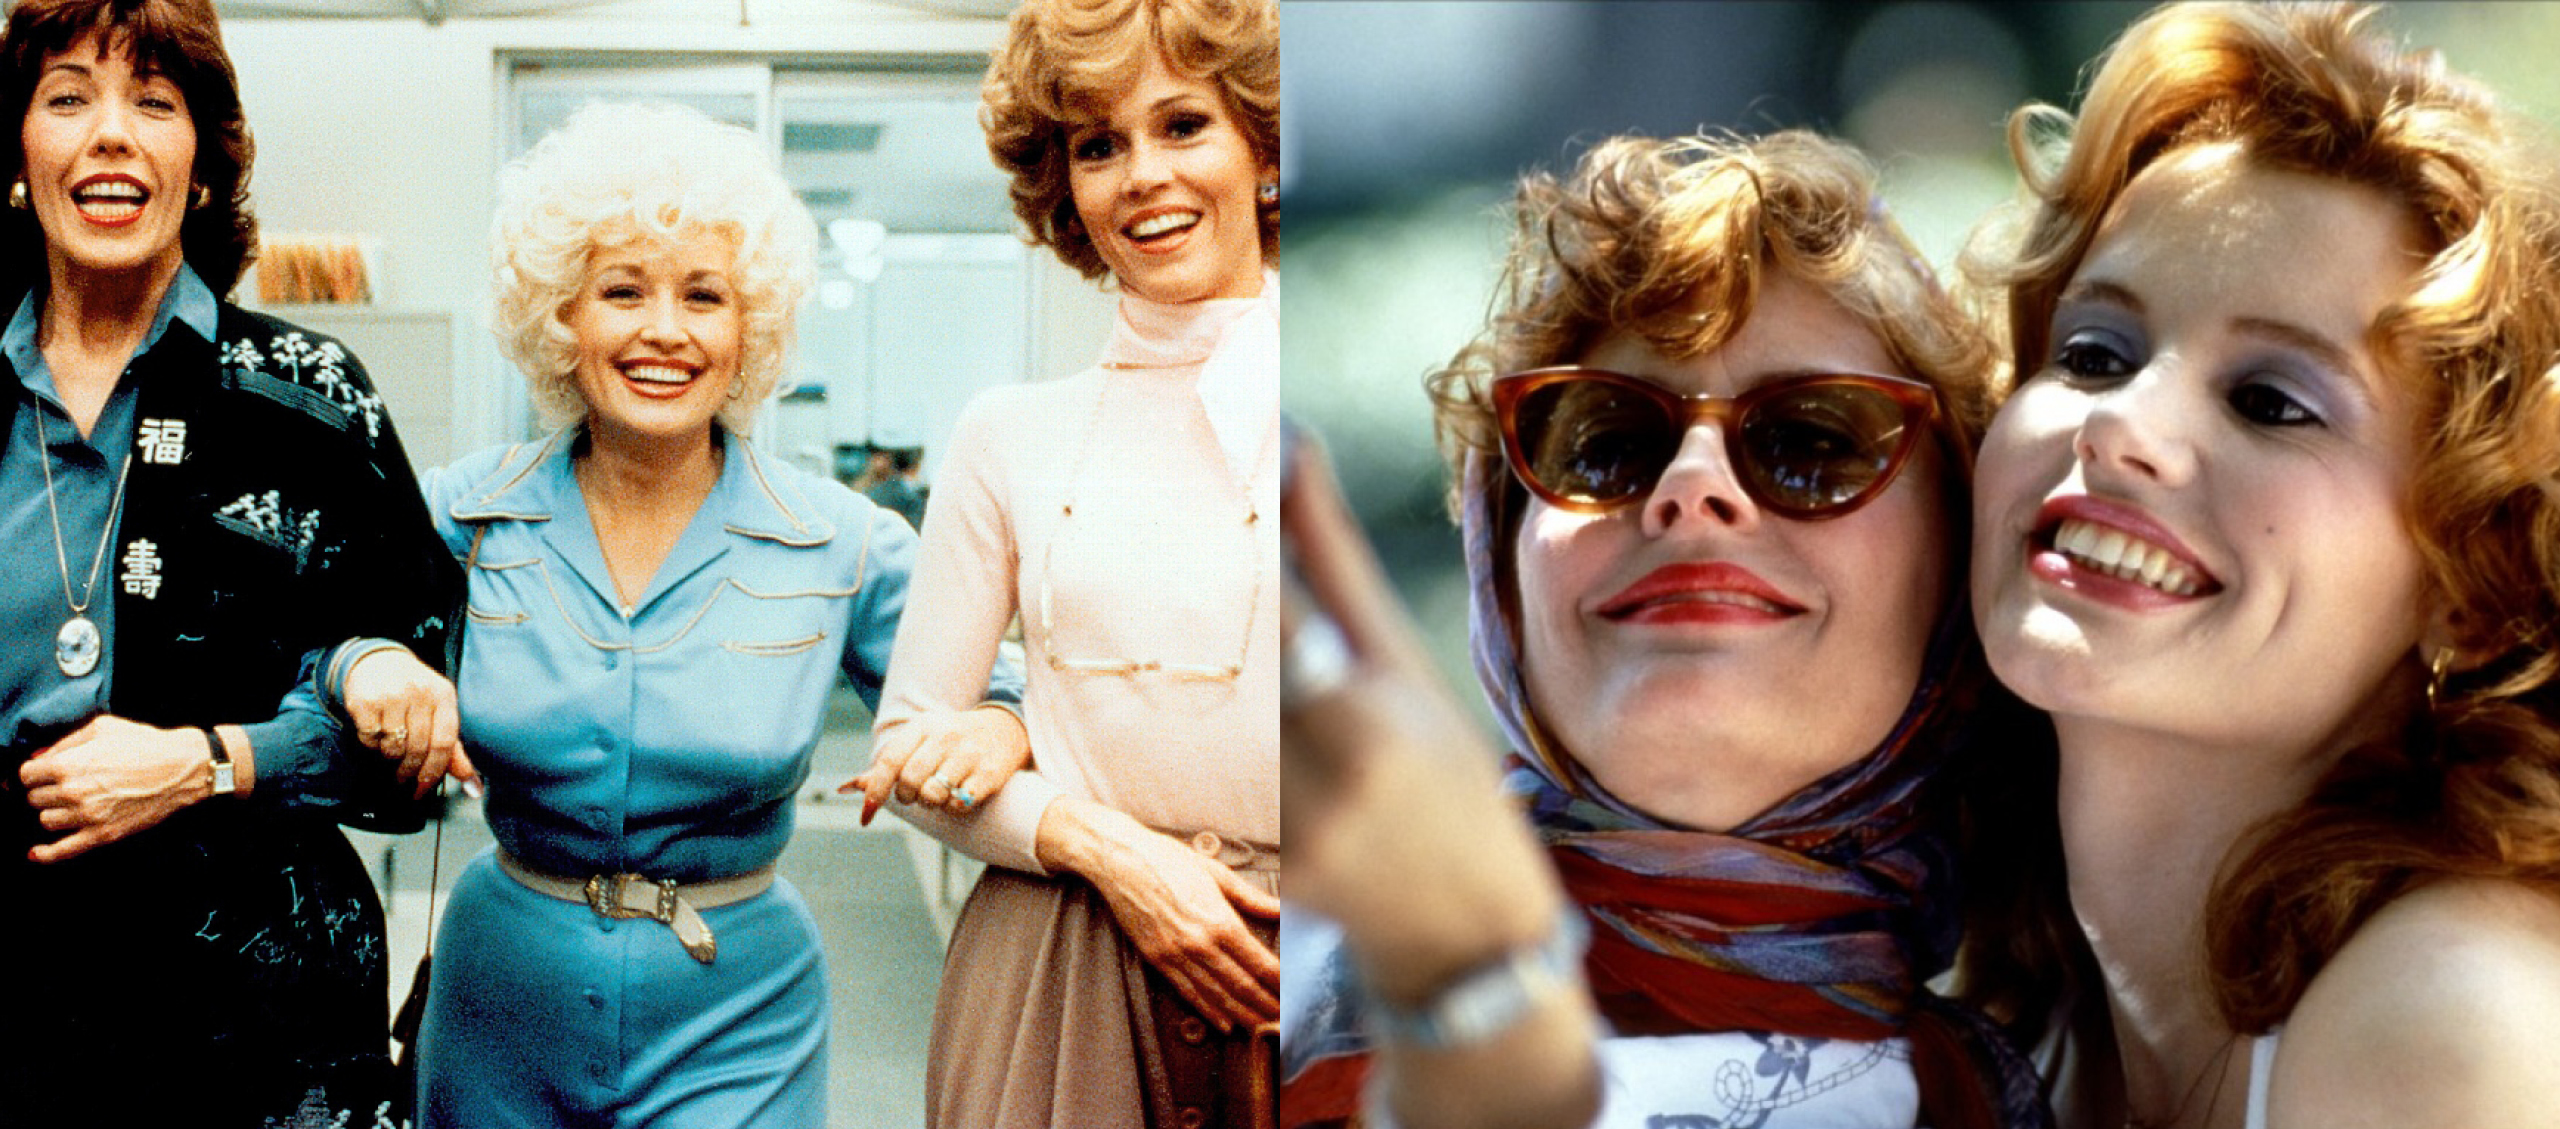 Thelma & Louise TV Guide - When & What Time Is It On?